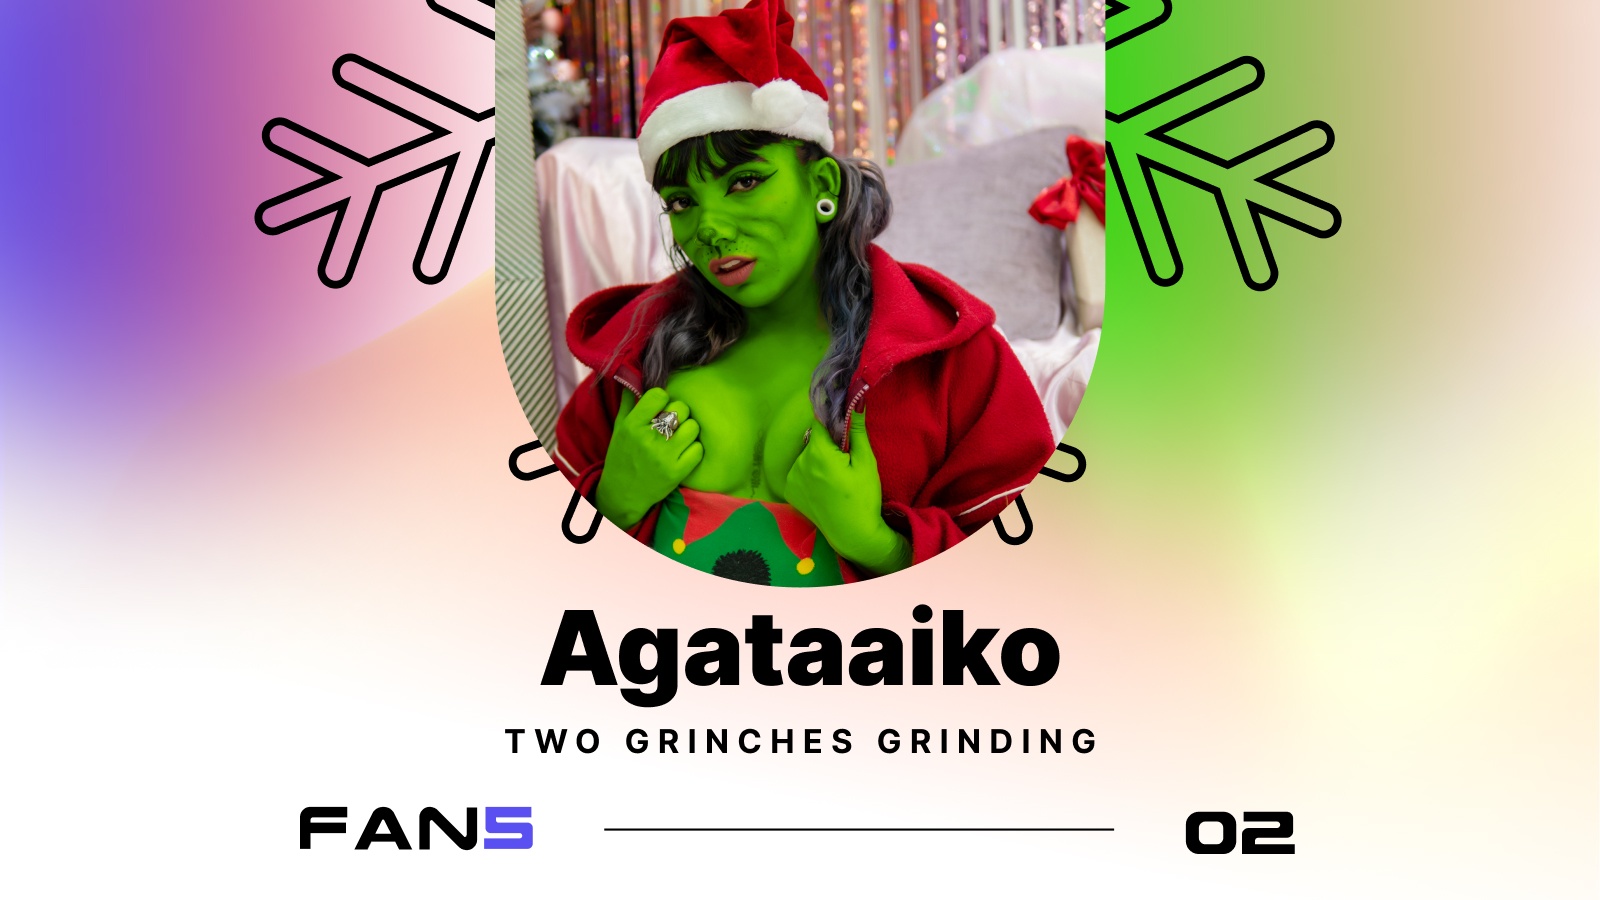 12 Girls of XXXMAS on FAN5: Agataaiko – Two Grinches Grinding